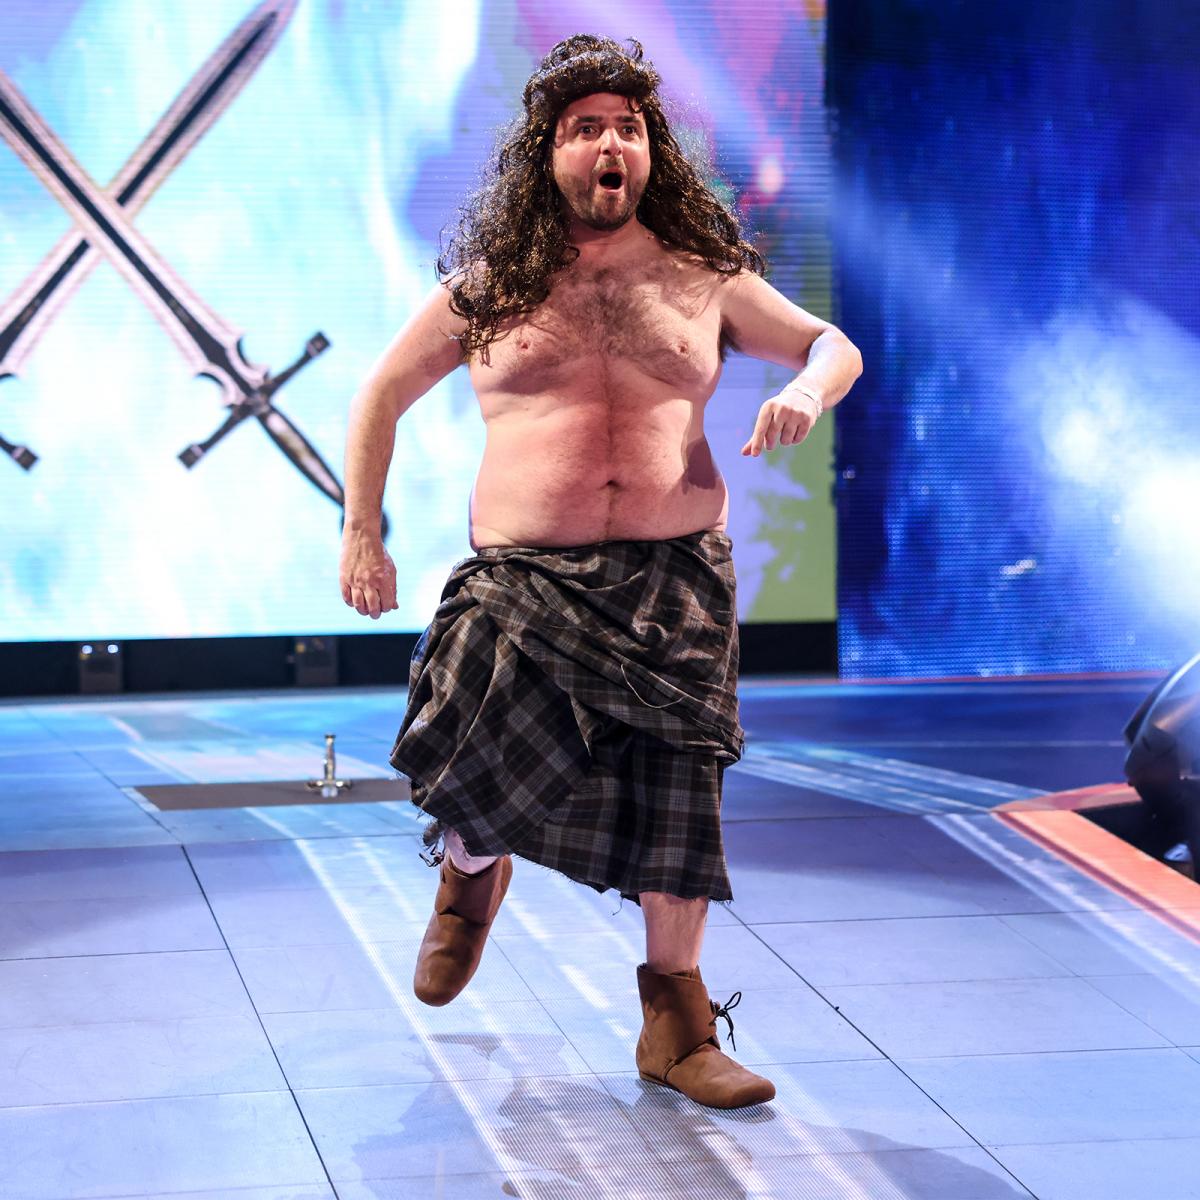 David Krumholtz could have been on Raw